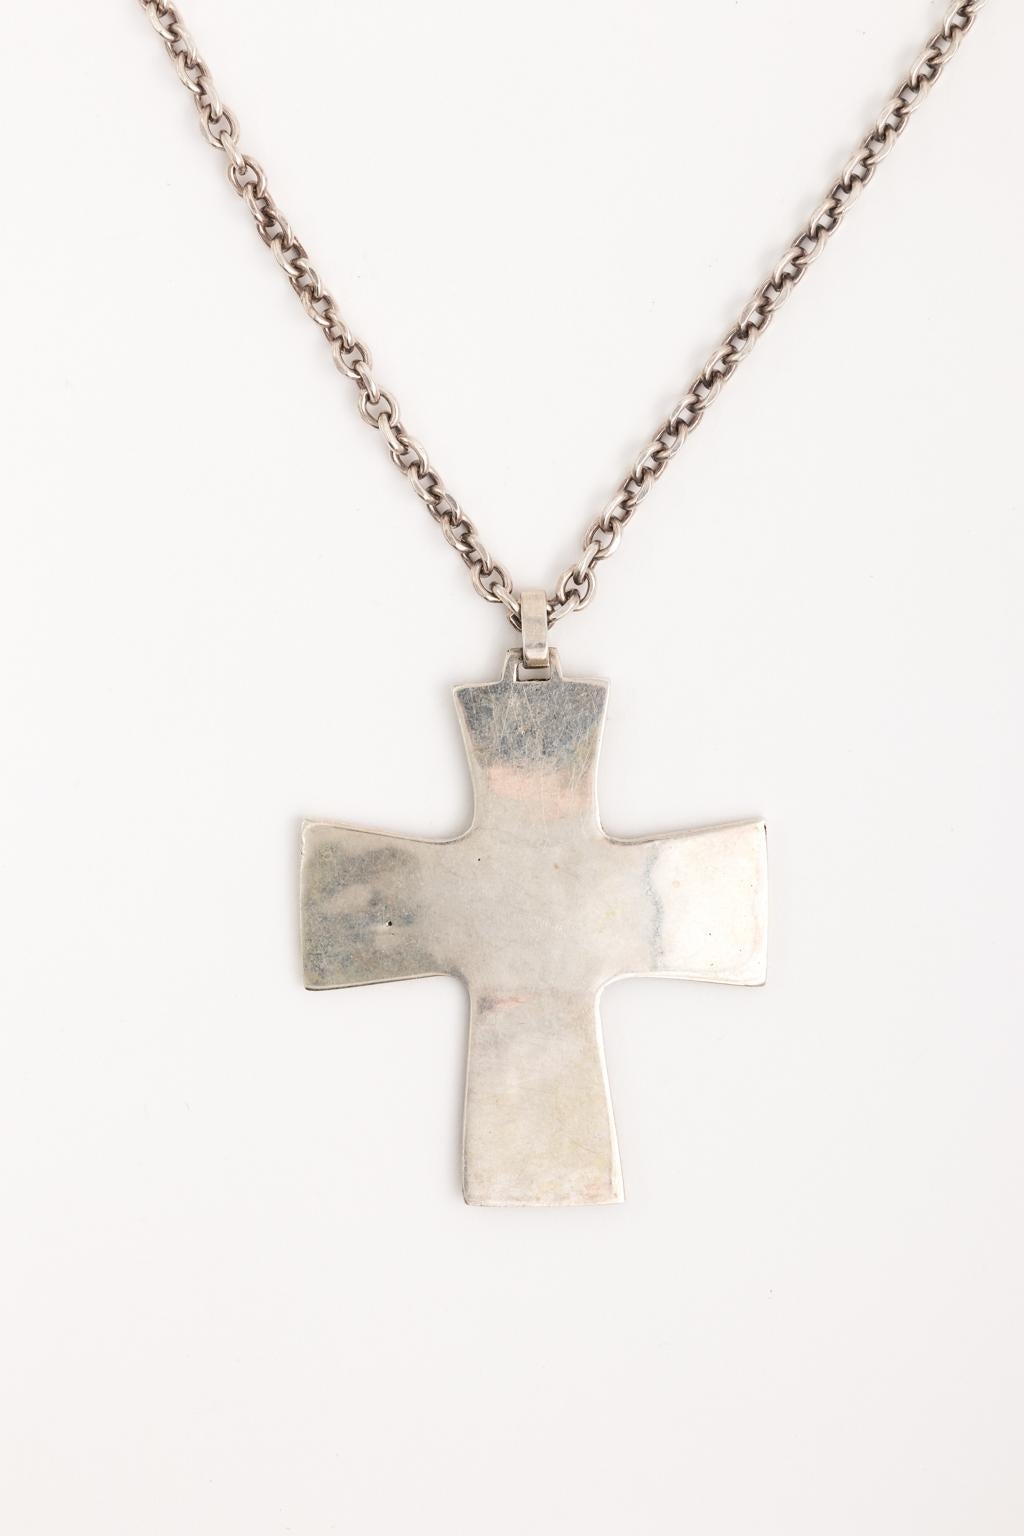 Circa 1890-1910 sterling silver handmade Maltese cross with hand carved twelve apostles and chain. Hallmark is from Austria and is on bottom left of cross. The chain measures 32.00 Inches long.
